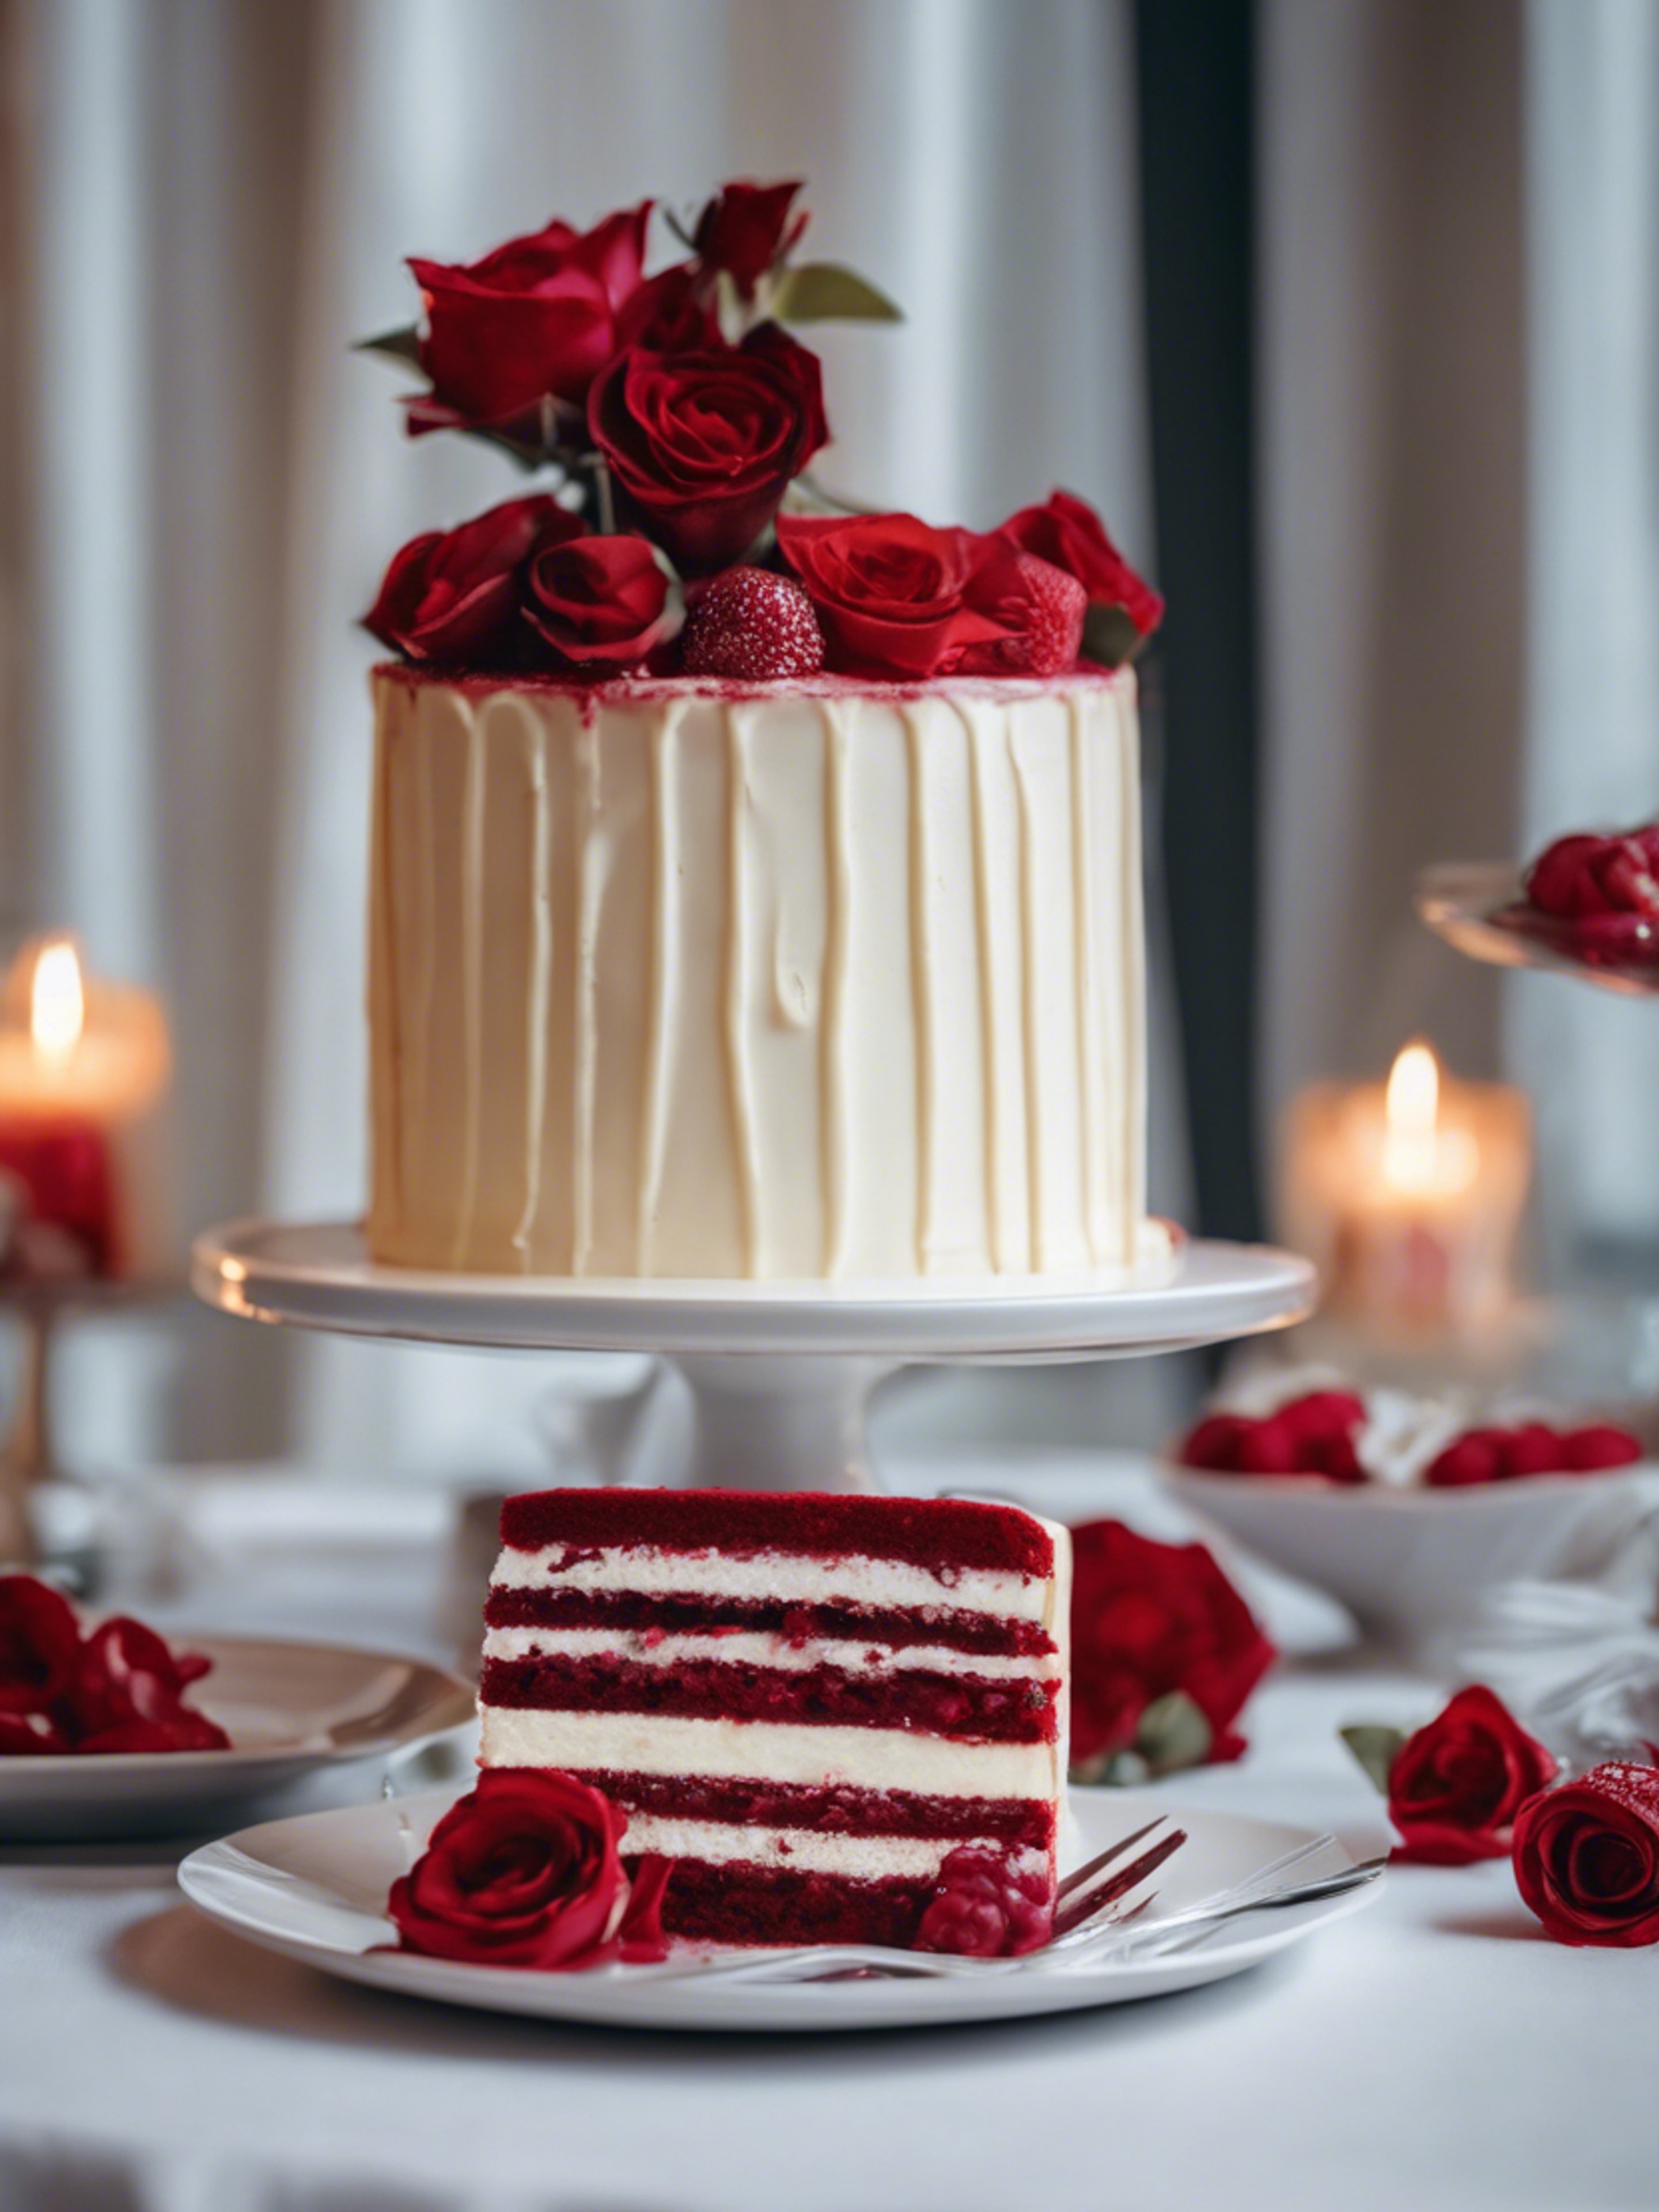 A scrumptious red velvet and white cream layered cake on a dessert table. Tapet[9c378ca78b014f2daafb]